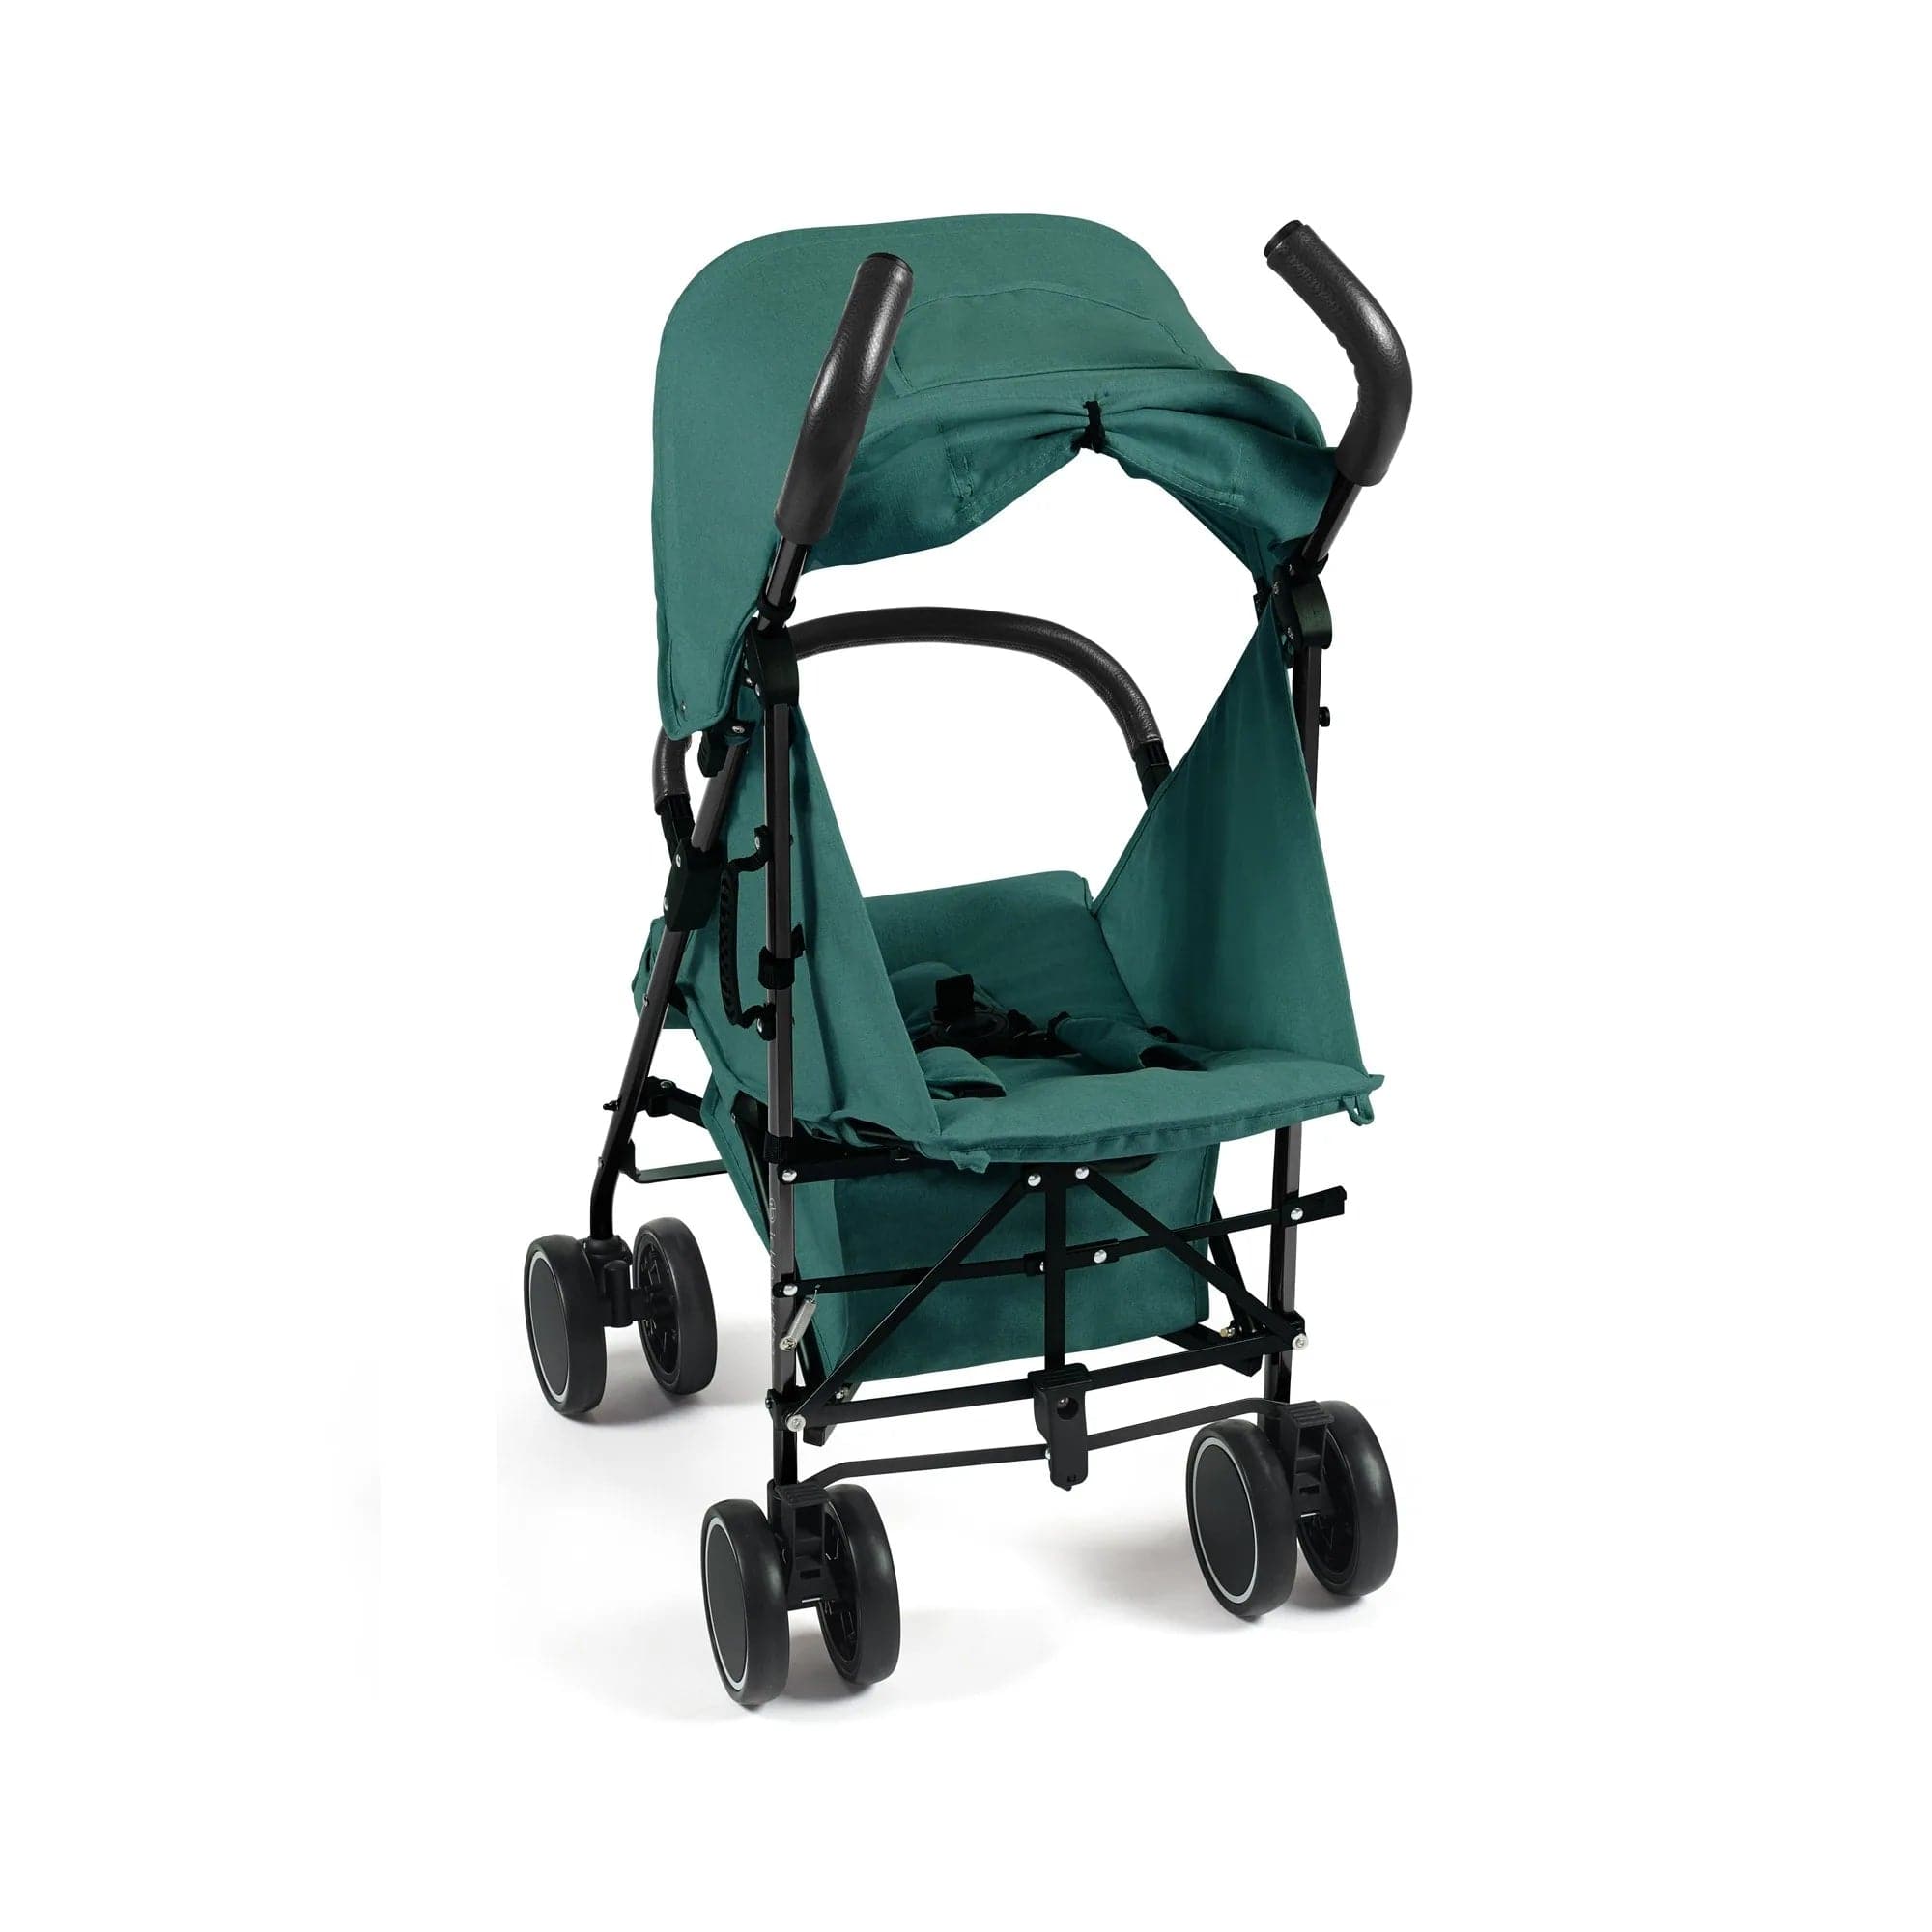 Ickle bubba Discovery Stroller - Matt Black / Teal - For Your Little One